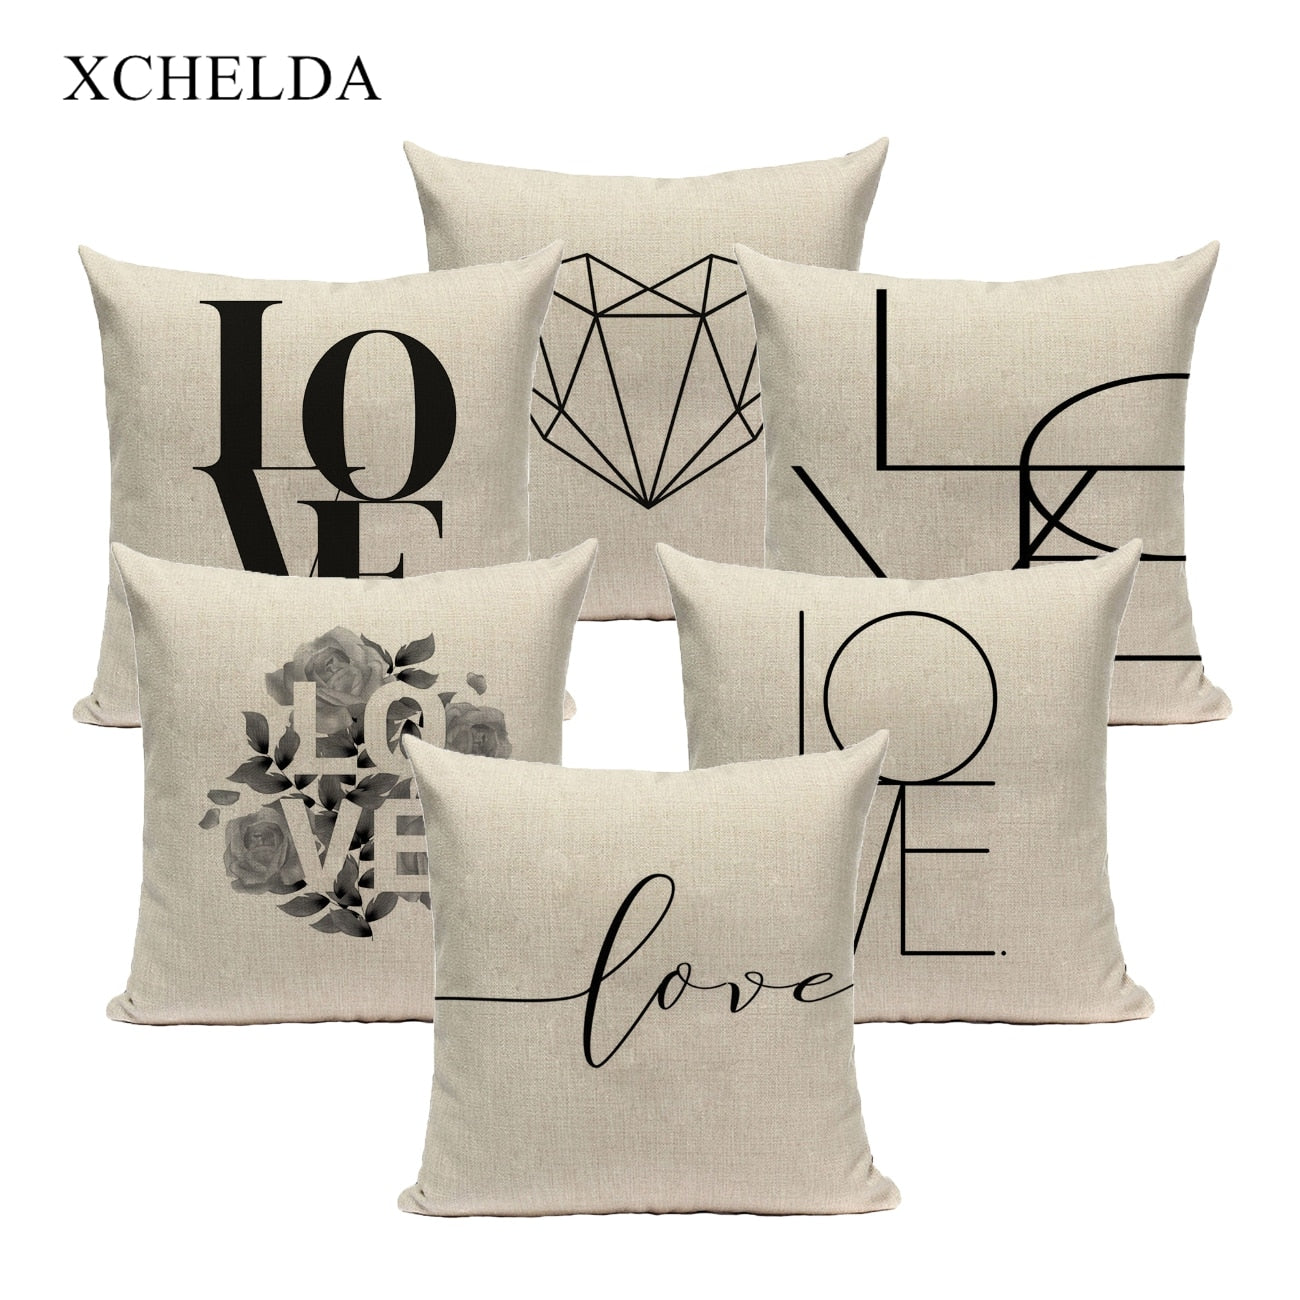 Neutral Colors Nordic Cushion Cover Home Pillow Case for Sofa Chair Natural Decorative Nordic Pillowcase 45x45 40x40